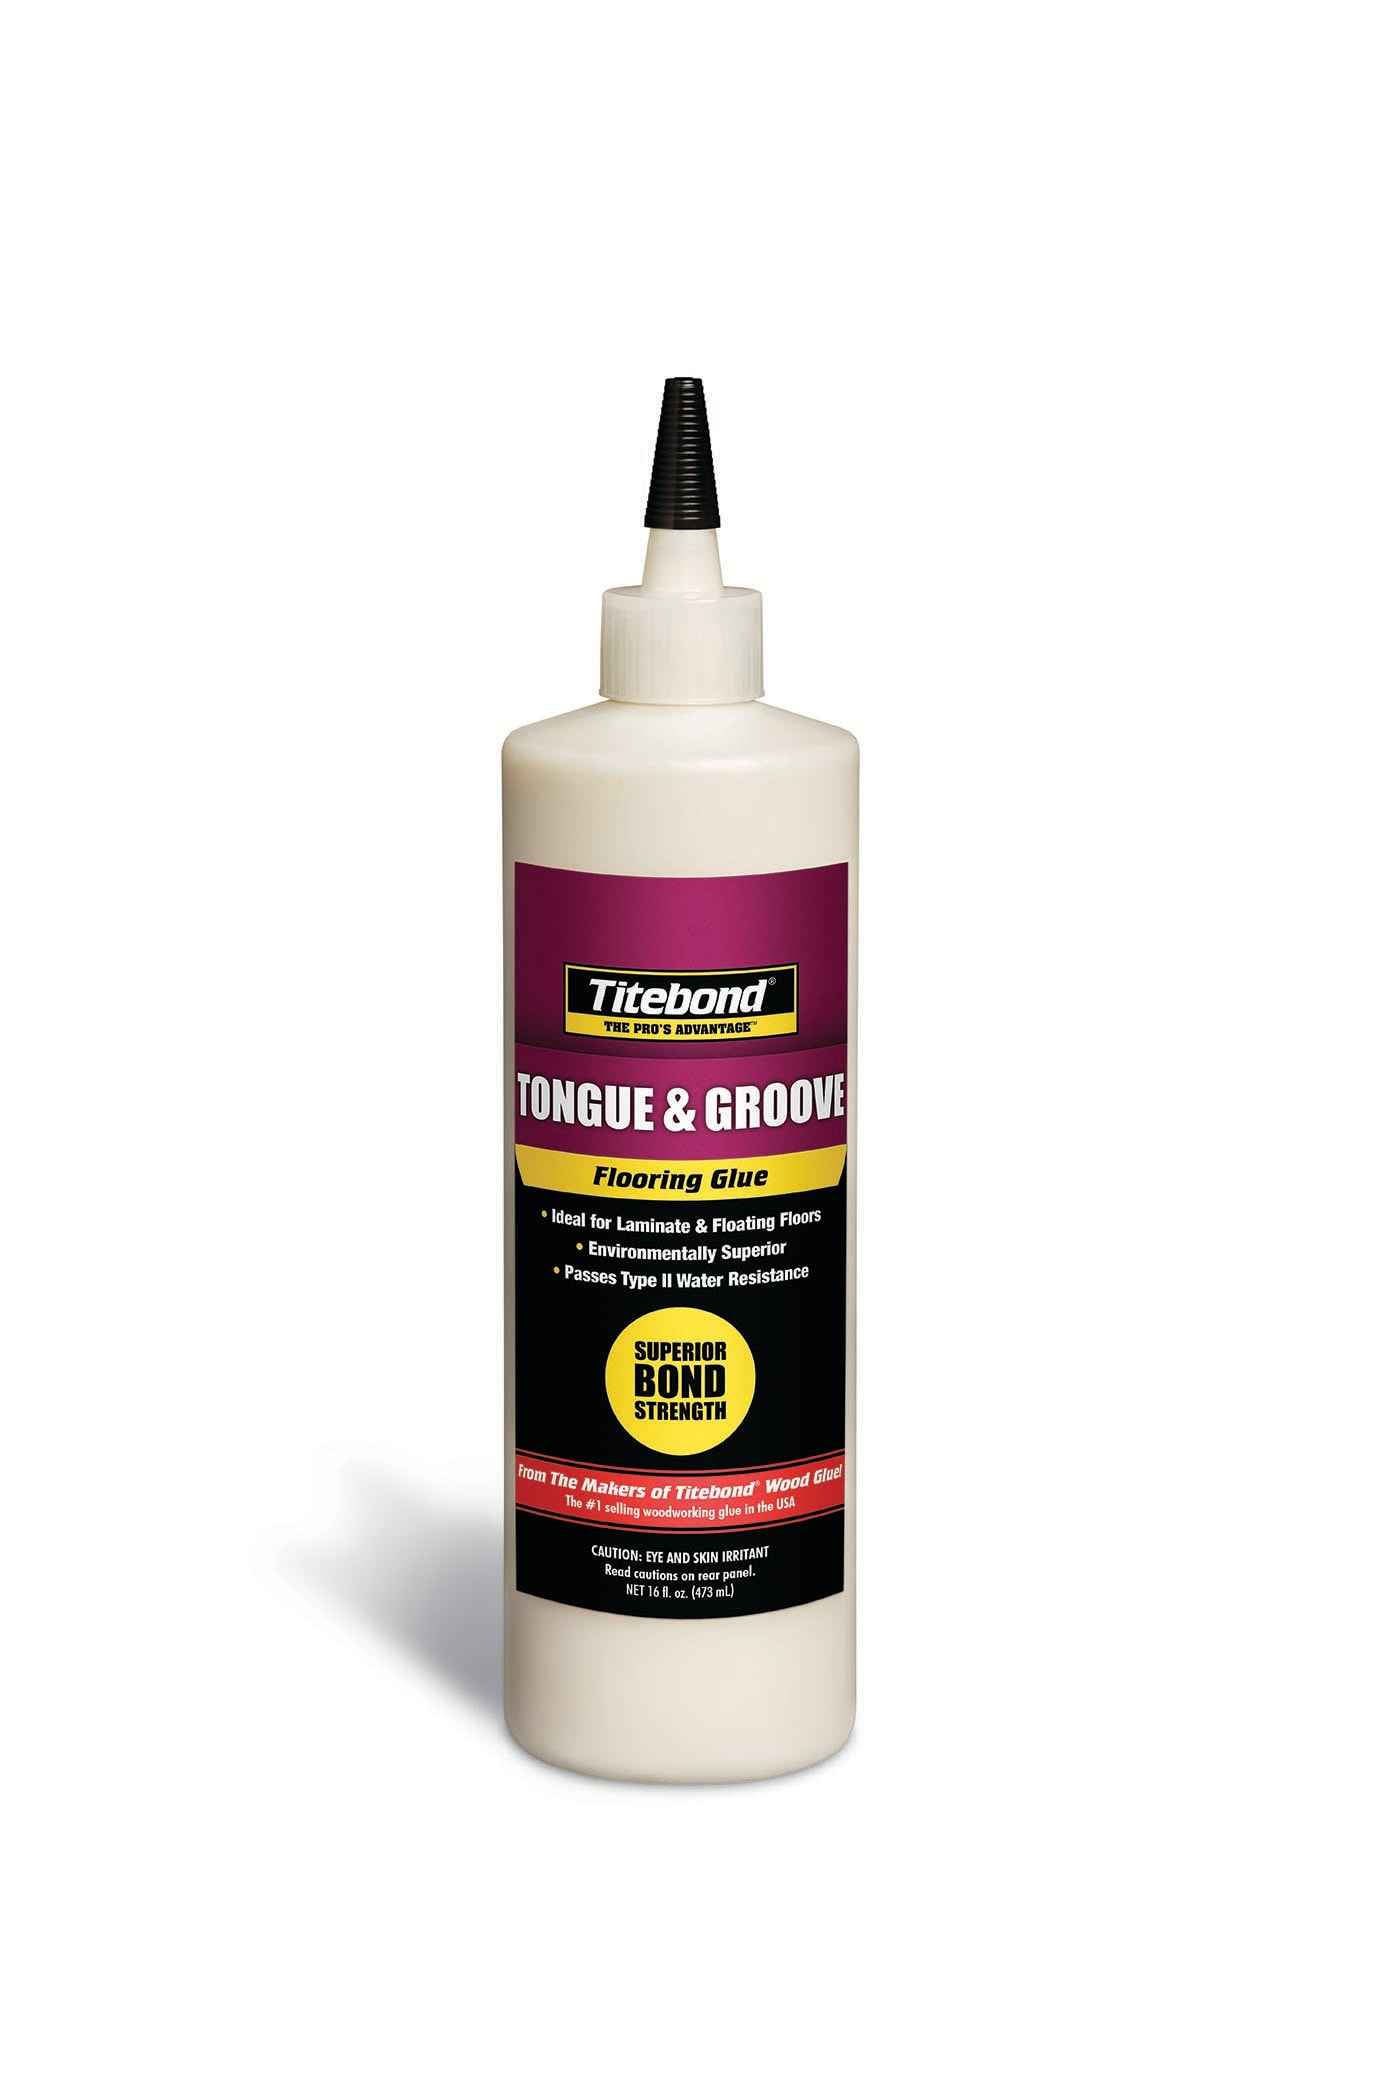 What Glue To Use For Laminate Flooring